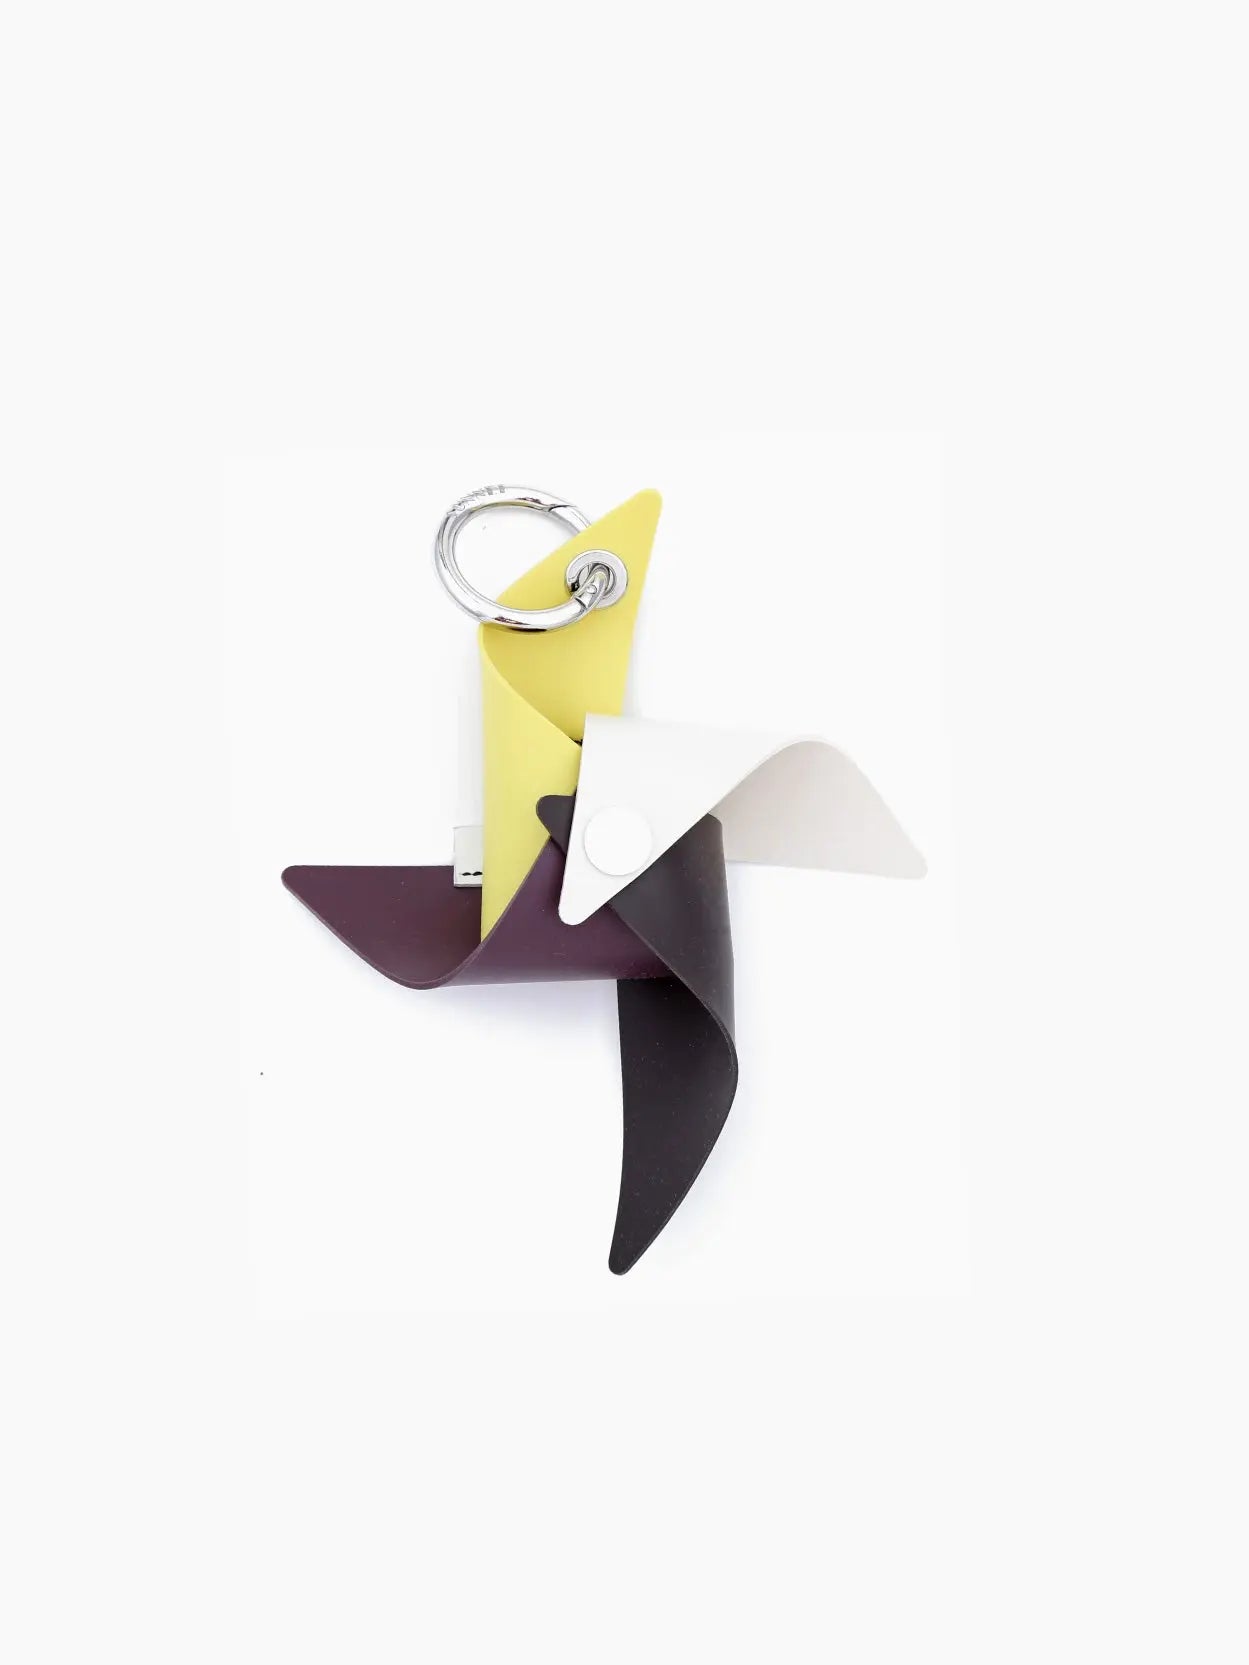 A Gomma Girandola Airpods Holder Multi Off White by Sunnei designed to resemble a pinwheel with four blades, colored yellow, white, dark purple, and dark brown. The metal keyring is attached at the top. This stylish accessory can be found at Bassalstore in Barcelona. The entire design sits against a plain white background.